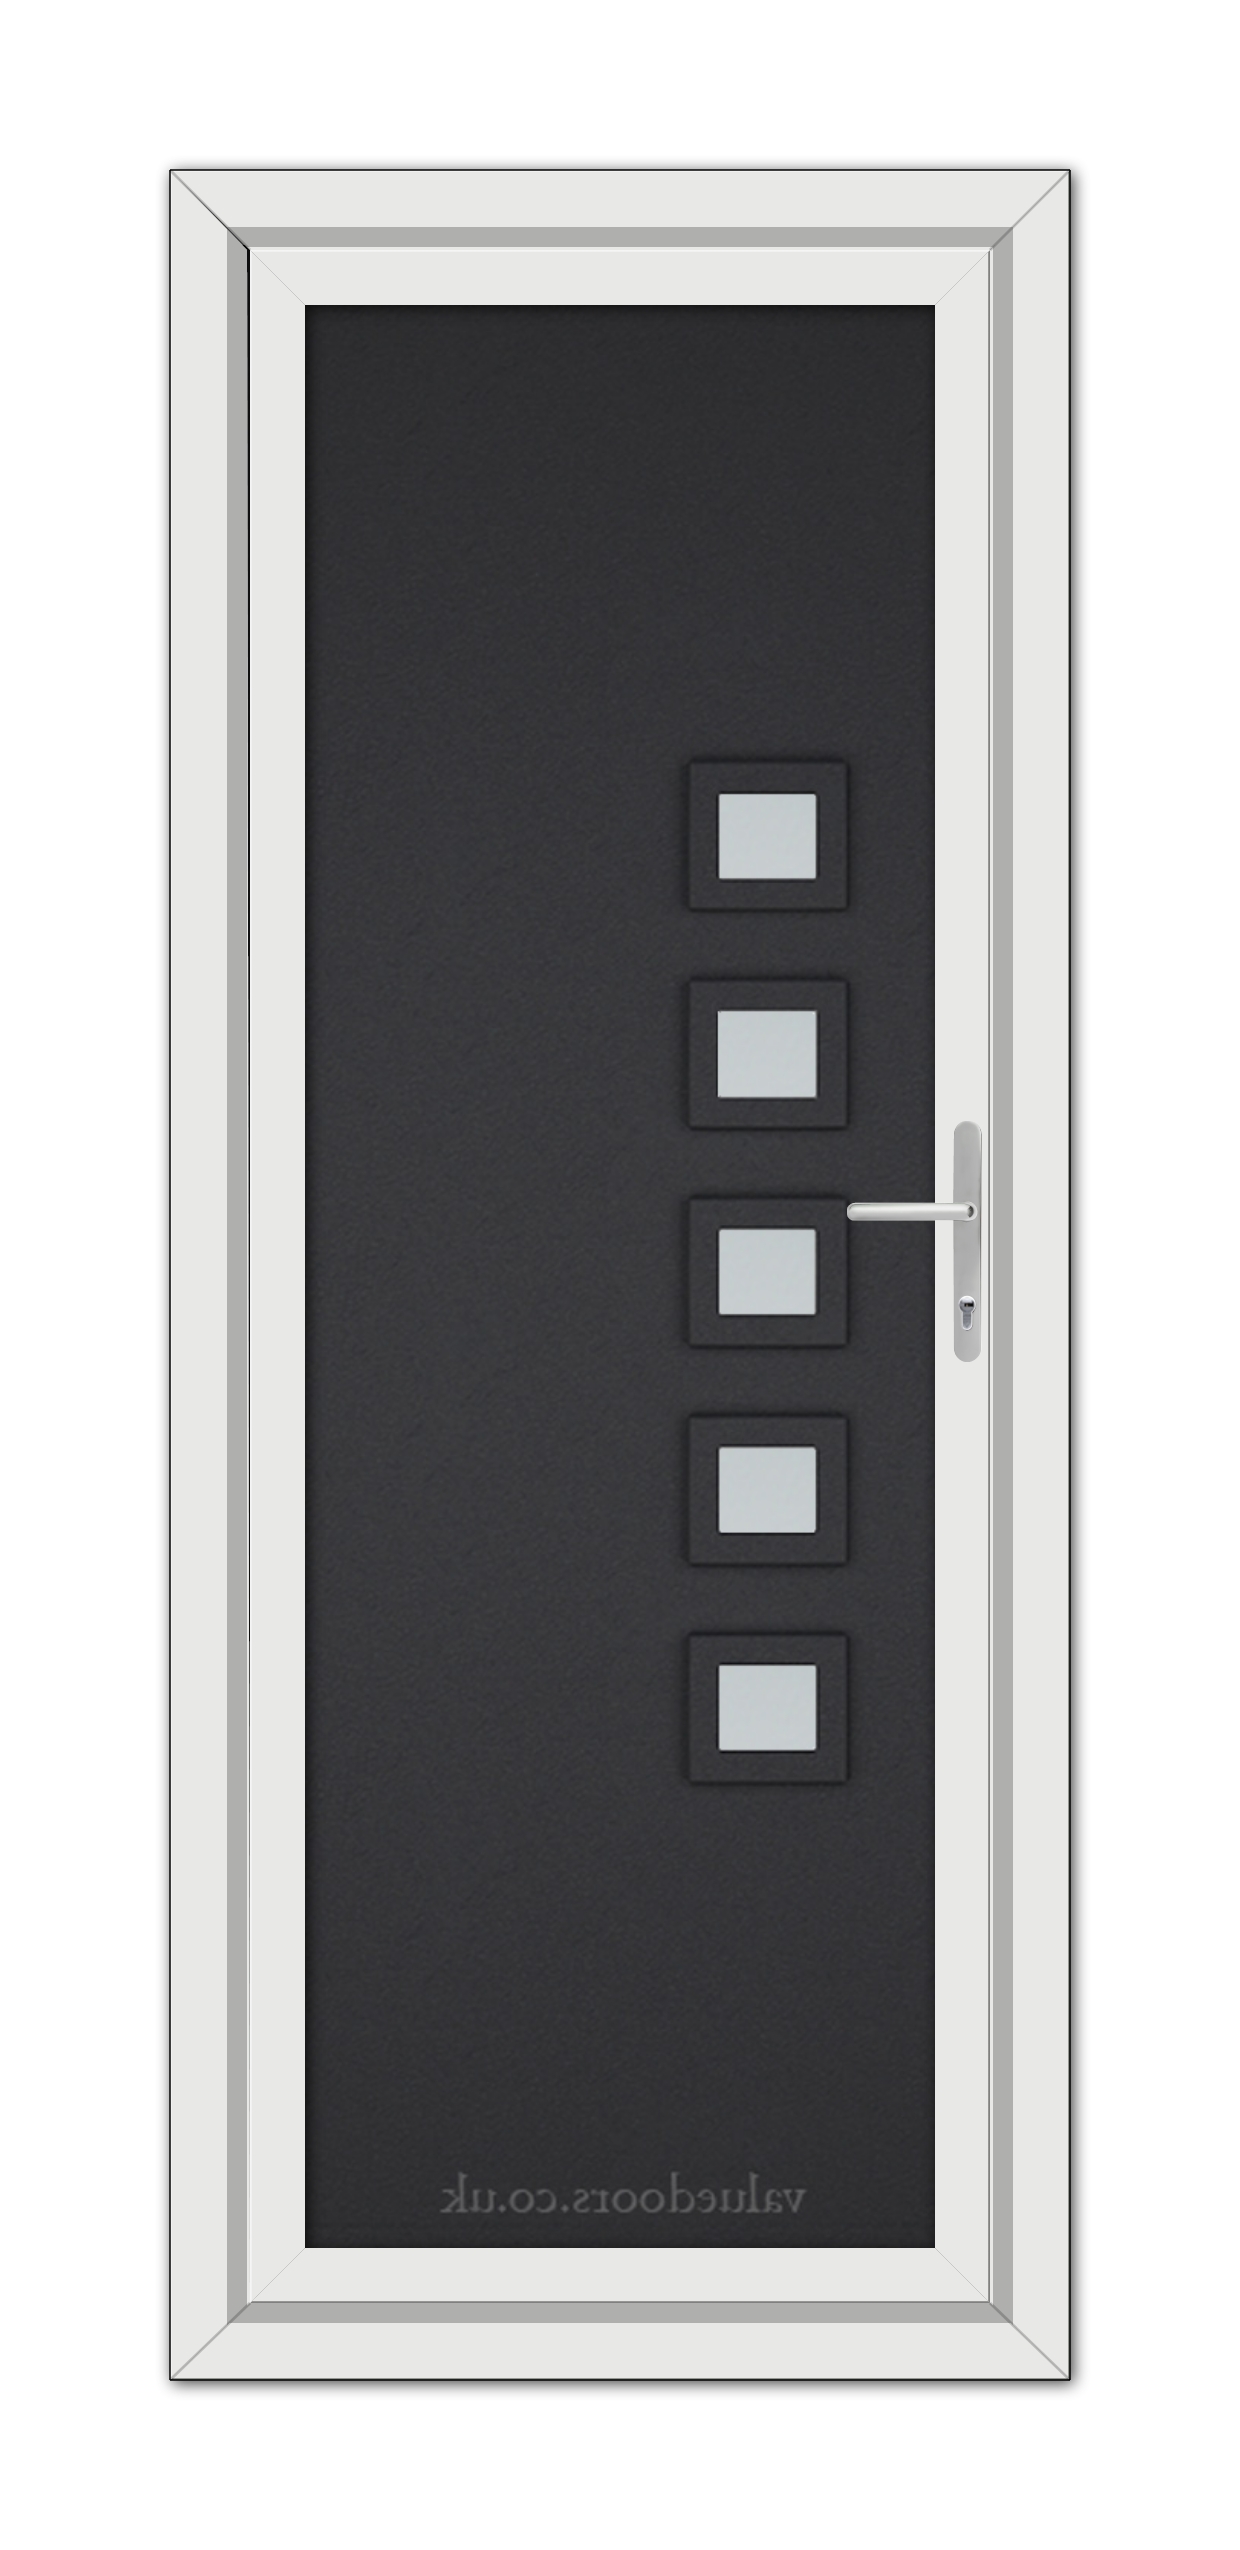 A modern Black Brown Malaga uPVC door with a dark gray surface, featuring six small rectangular windows and a metal handle, set in a white frame.